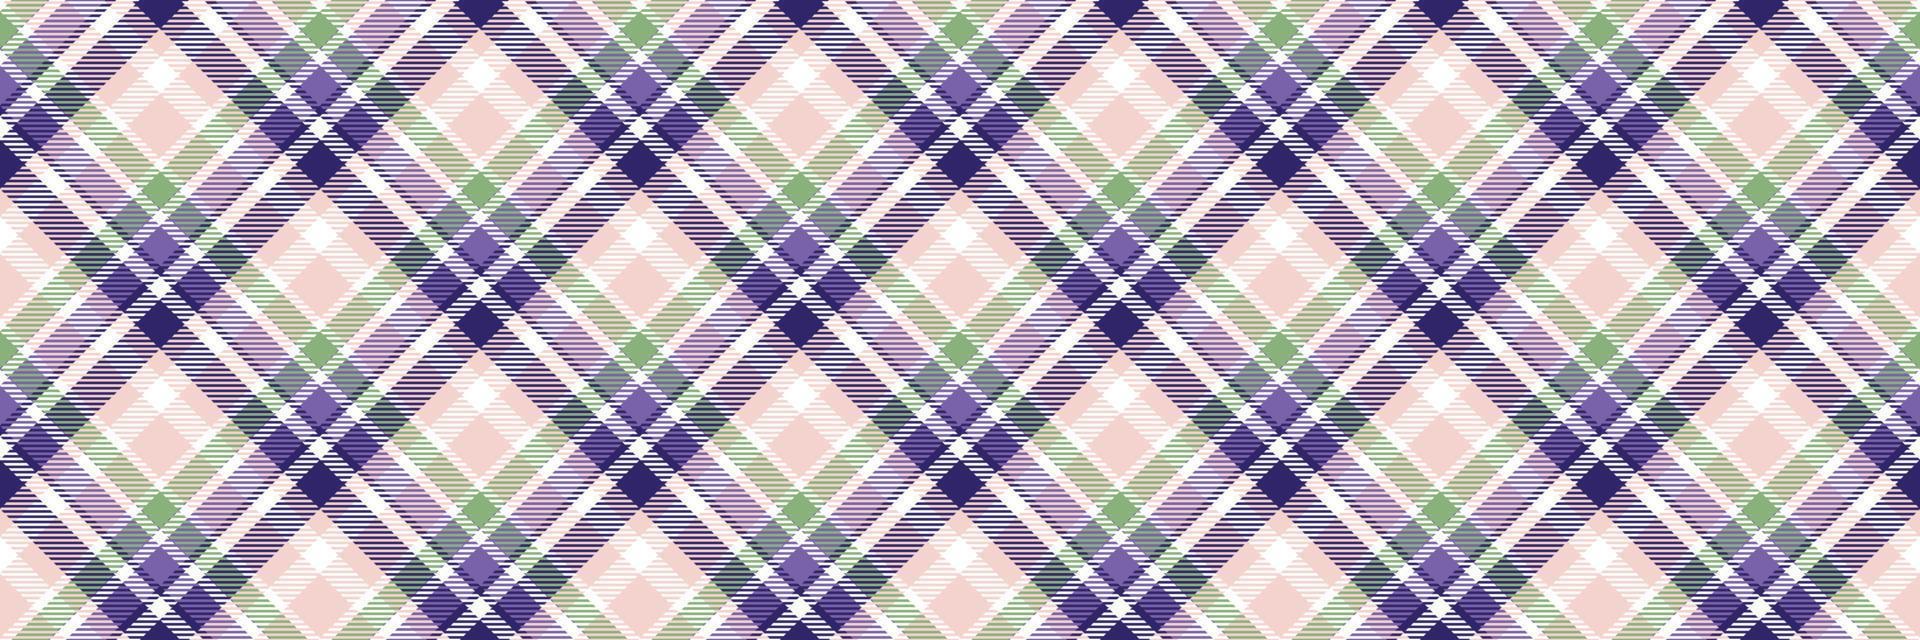 Simple plaid pattern is a patterned cloth consisting of criss crossed, horizontal and vertical bands in multiple colours.plaid Seamless for  scarf,pyjamas,blanket,duvet,kilt large shawl. vector